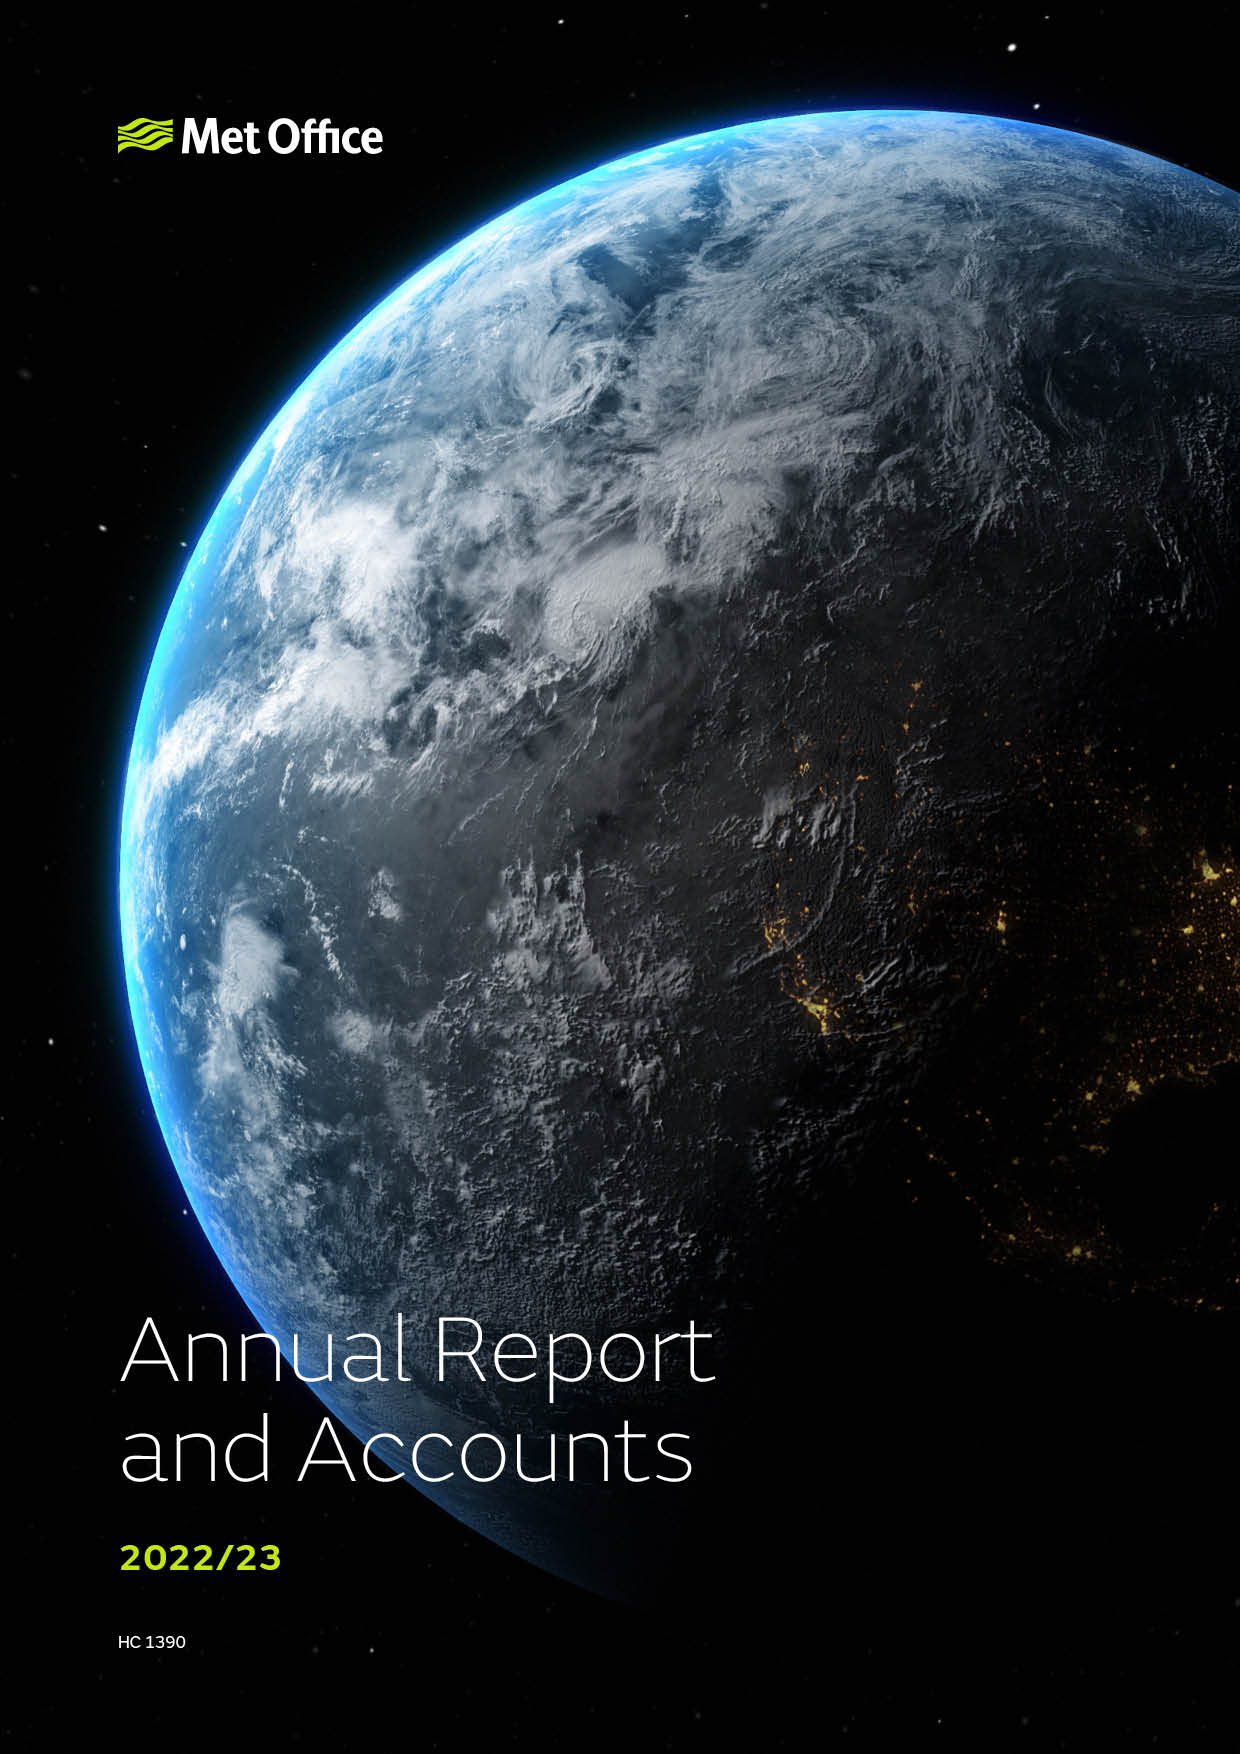 Met Office Annual Report and Accounts front cover. Background image is of the earth at night from space with the Met Office logo in the top left of the page. Title: Annual Report and Accounts 2022/23 (HC 1390).